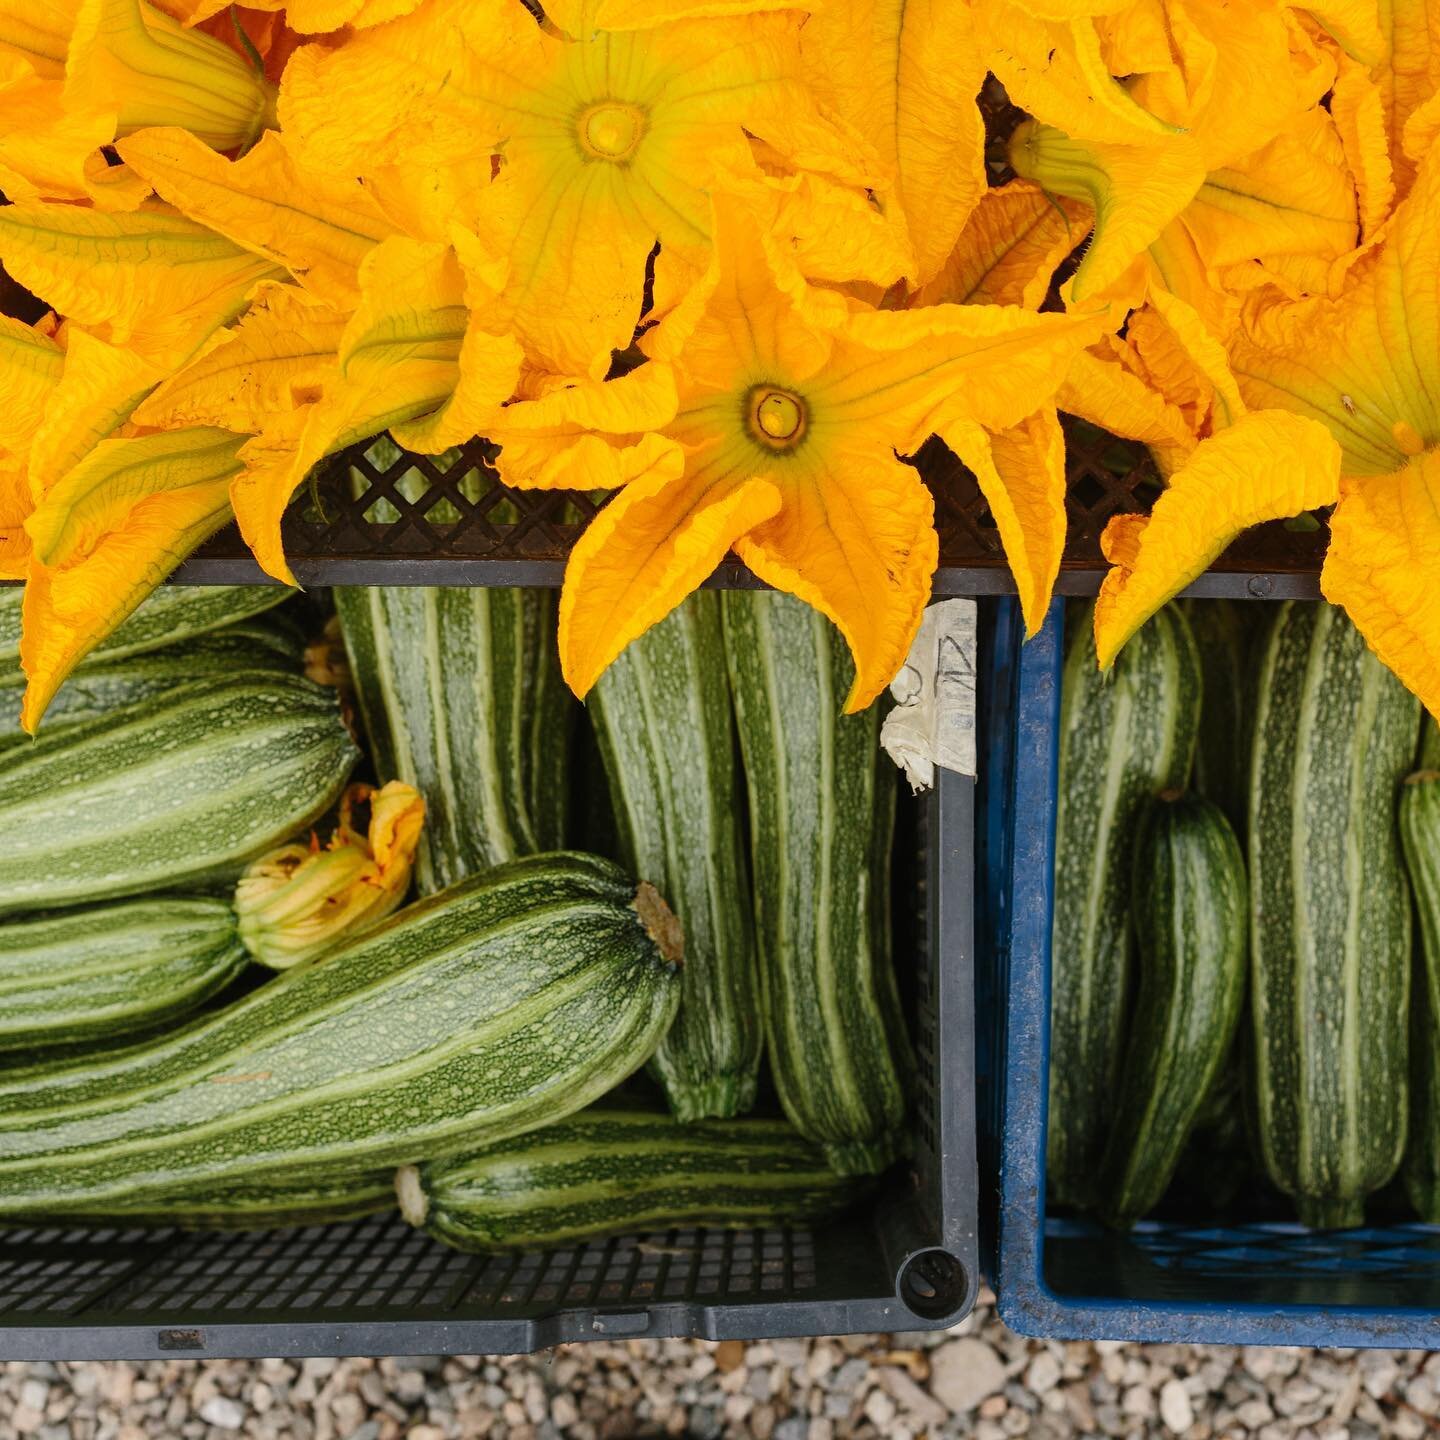 Nothing says &ldquo;summer&rdquo; like Italian Heirloom Zucchini also known as Costata Romanesco.  It has a nutty flavor, lovely texture and the blossoms are edible too!
Photo: @patrickrecord
#italianheirloomzucchini
#shishitopeppers
#organic
#farmto